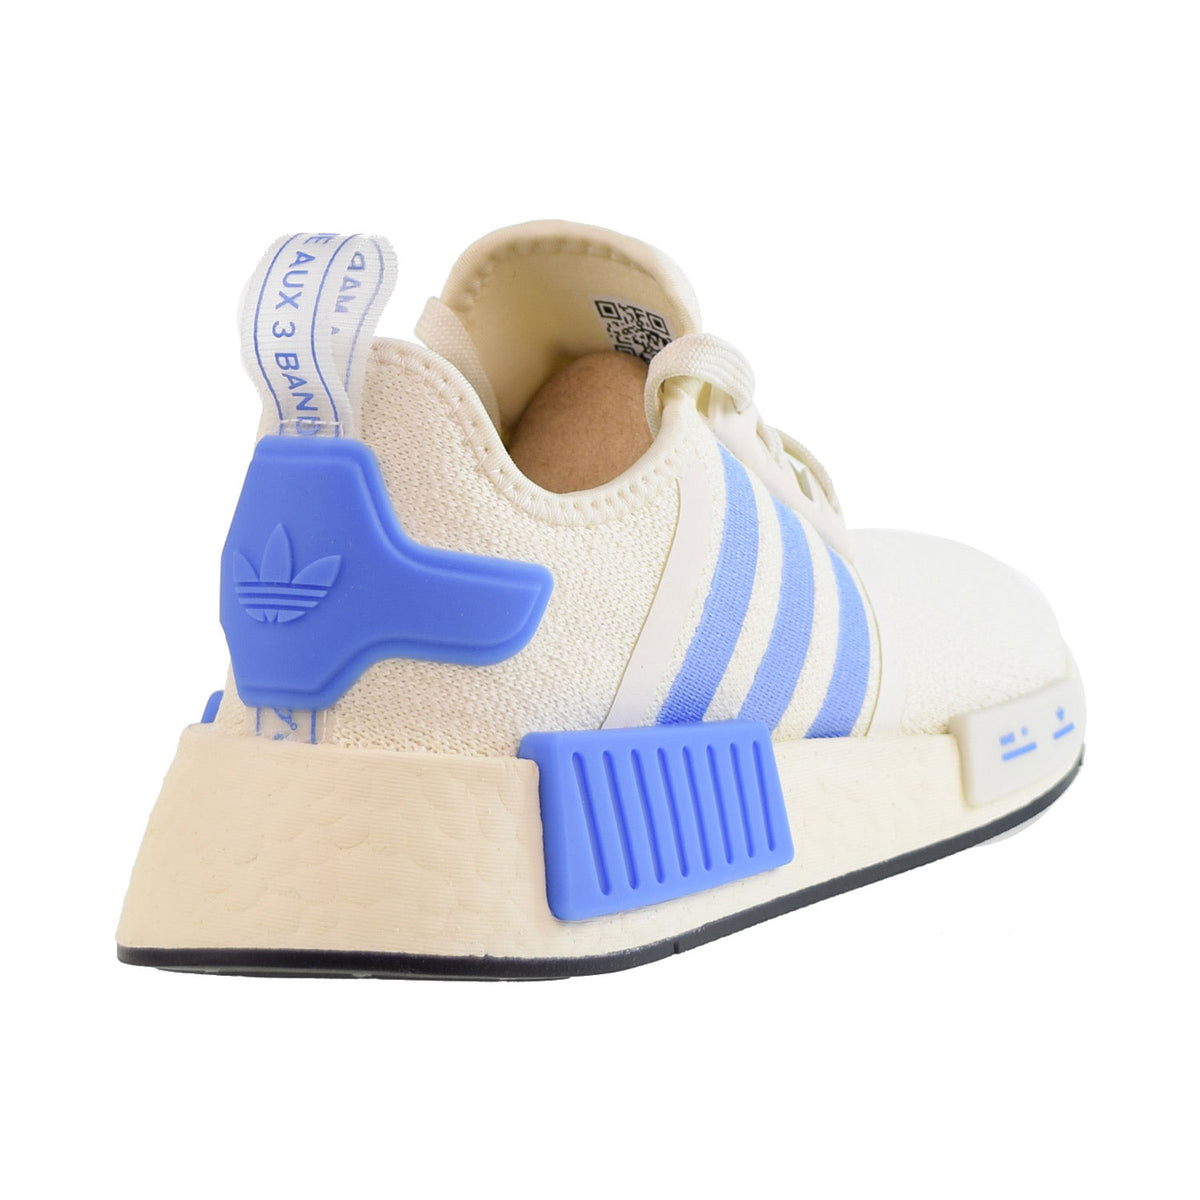 NMD_R1 Black White-Blue Women\'s Adidas Shoes Off Fusion-Core